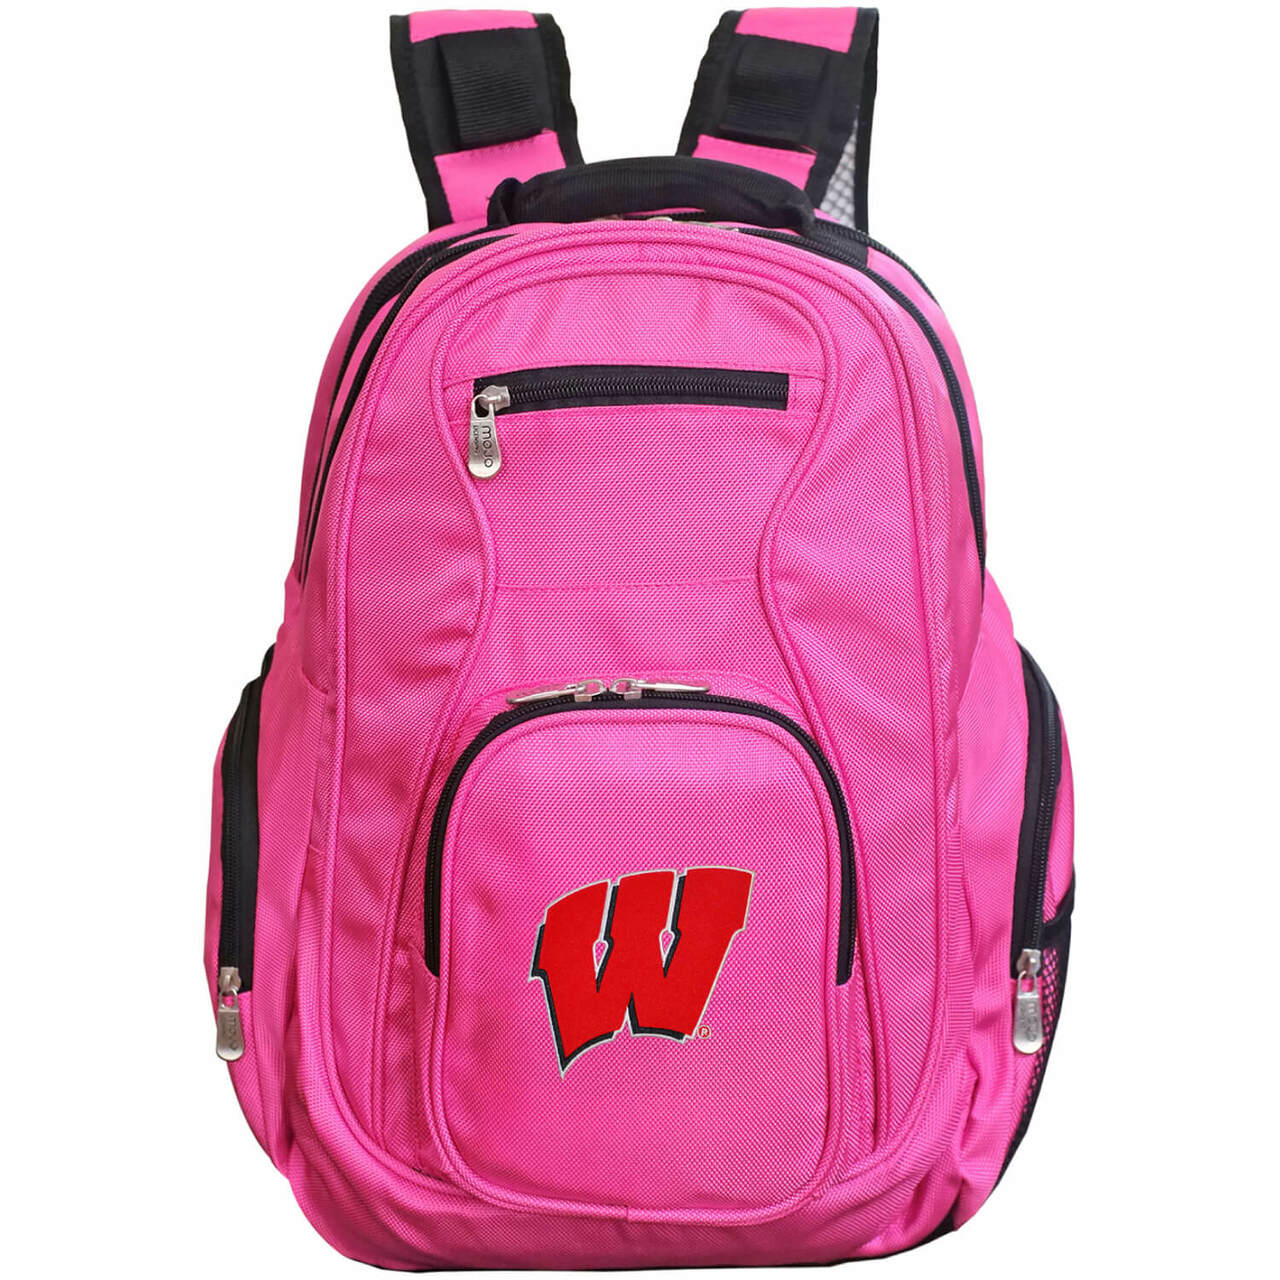 Wisconson Badgers Laptop Backpack Pink